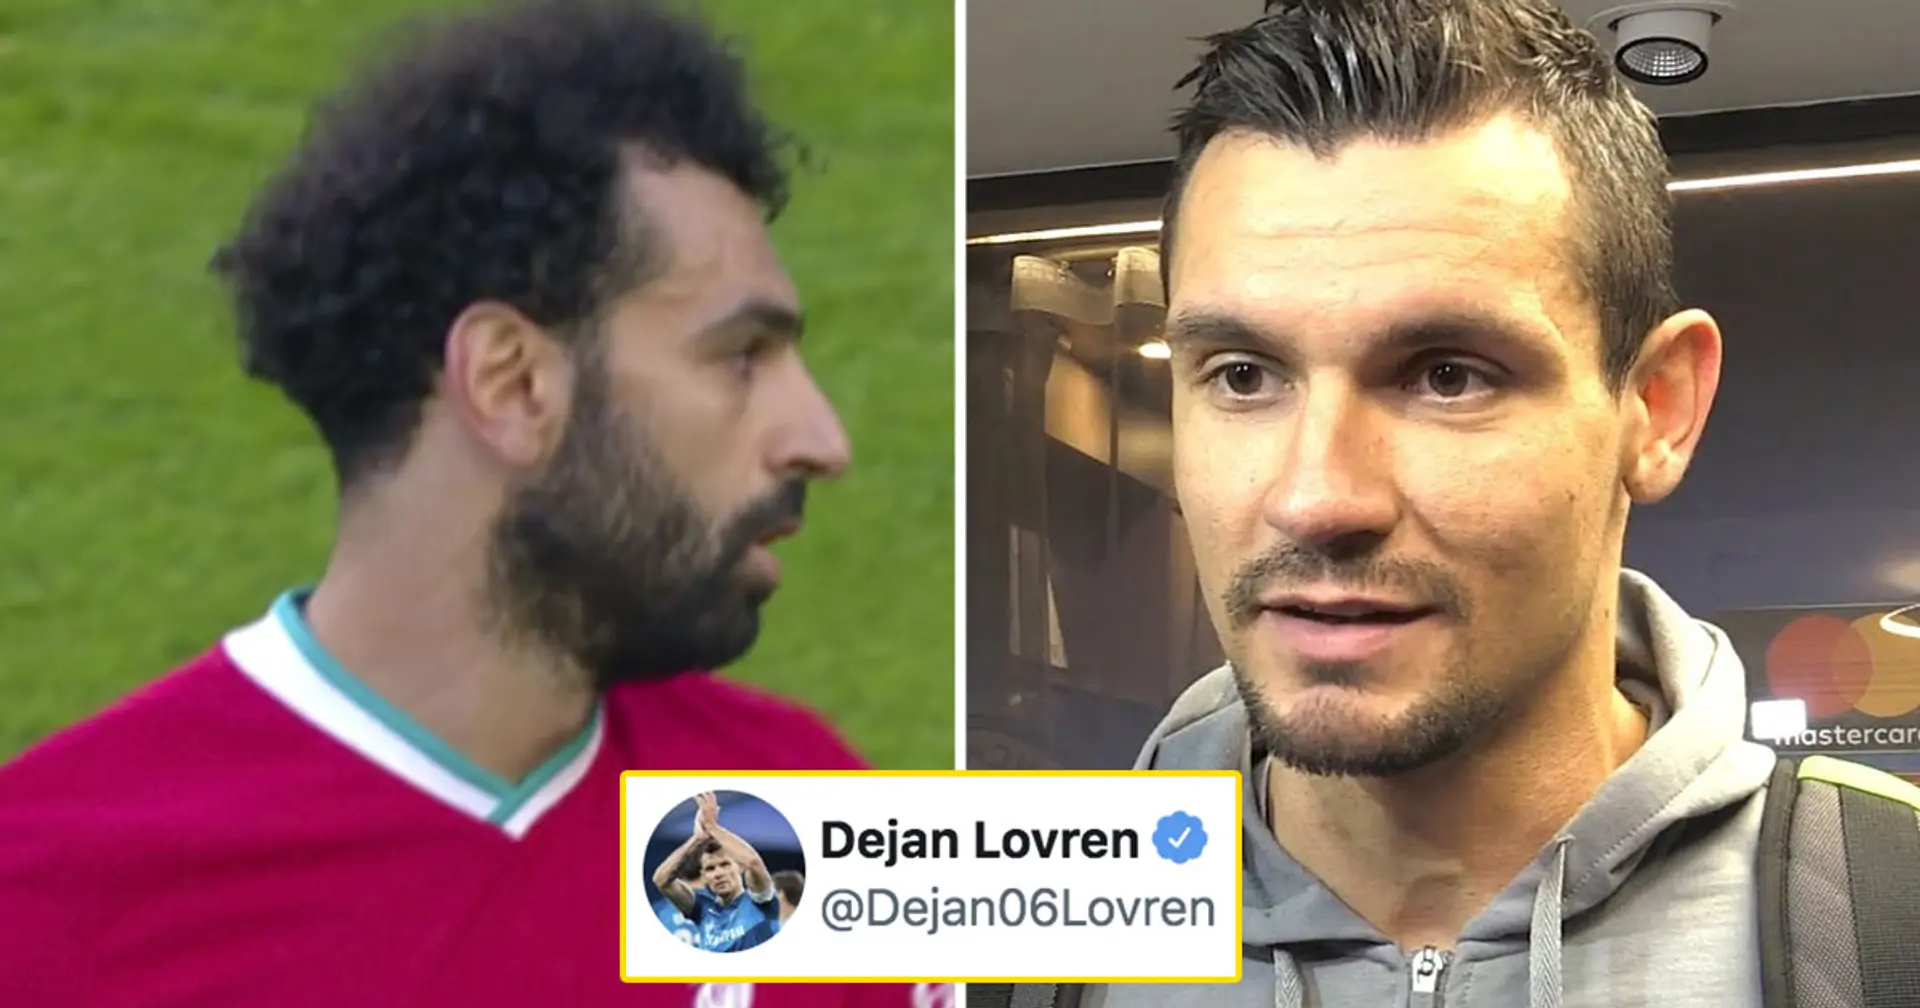 'Next year they move you to 6th position': Lovren mocks France Football as Salah scores two vs Everton